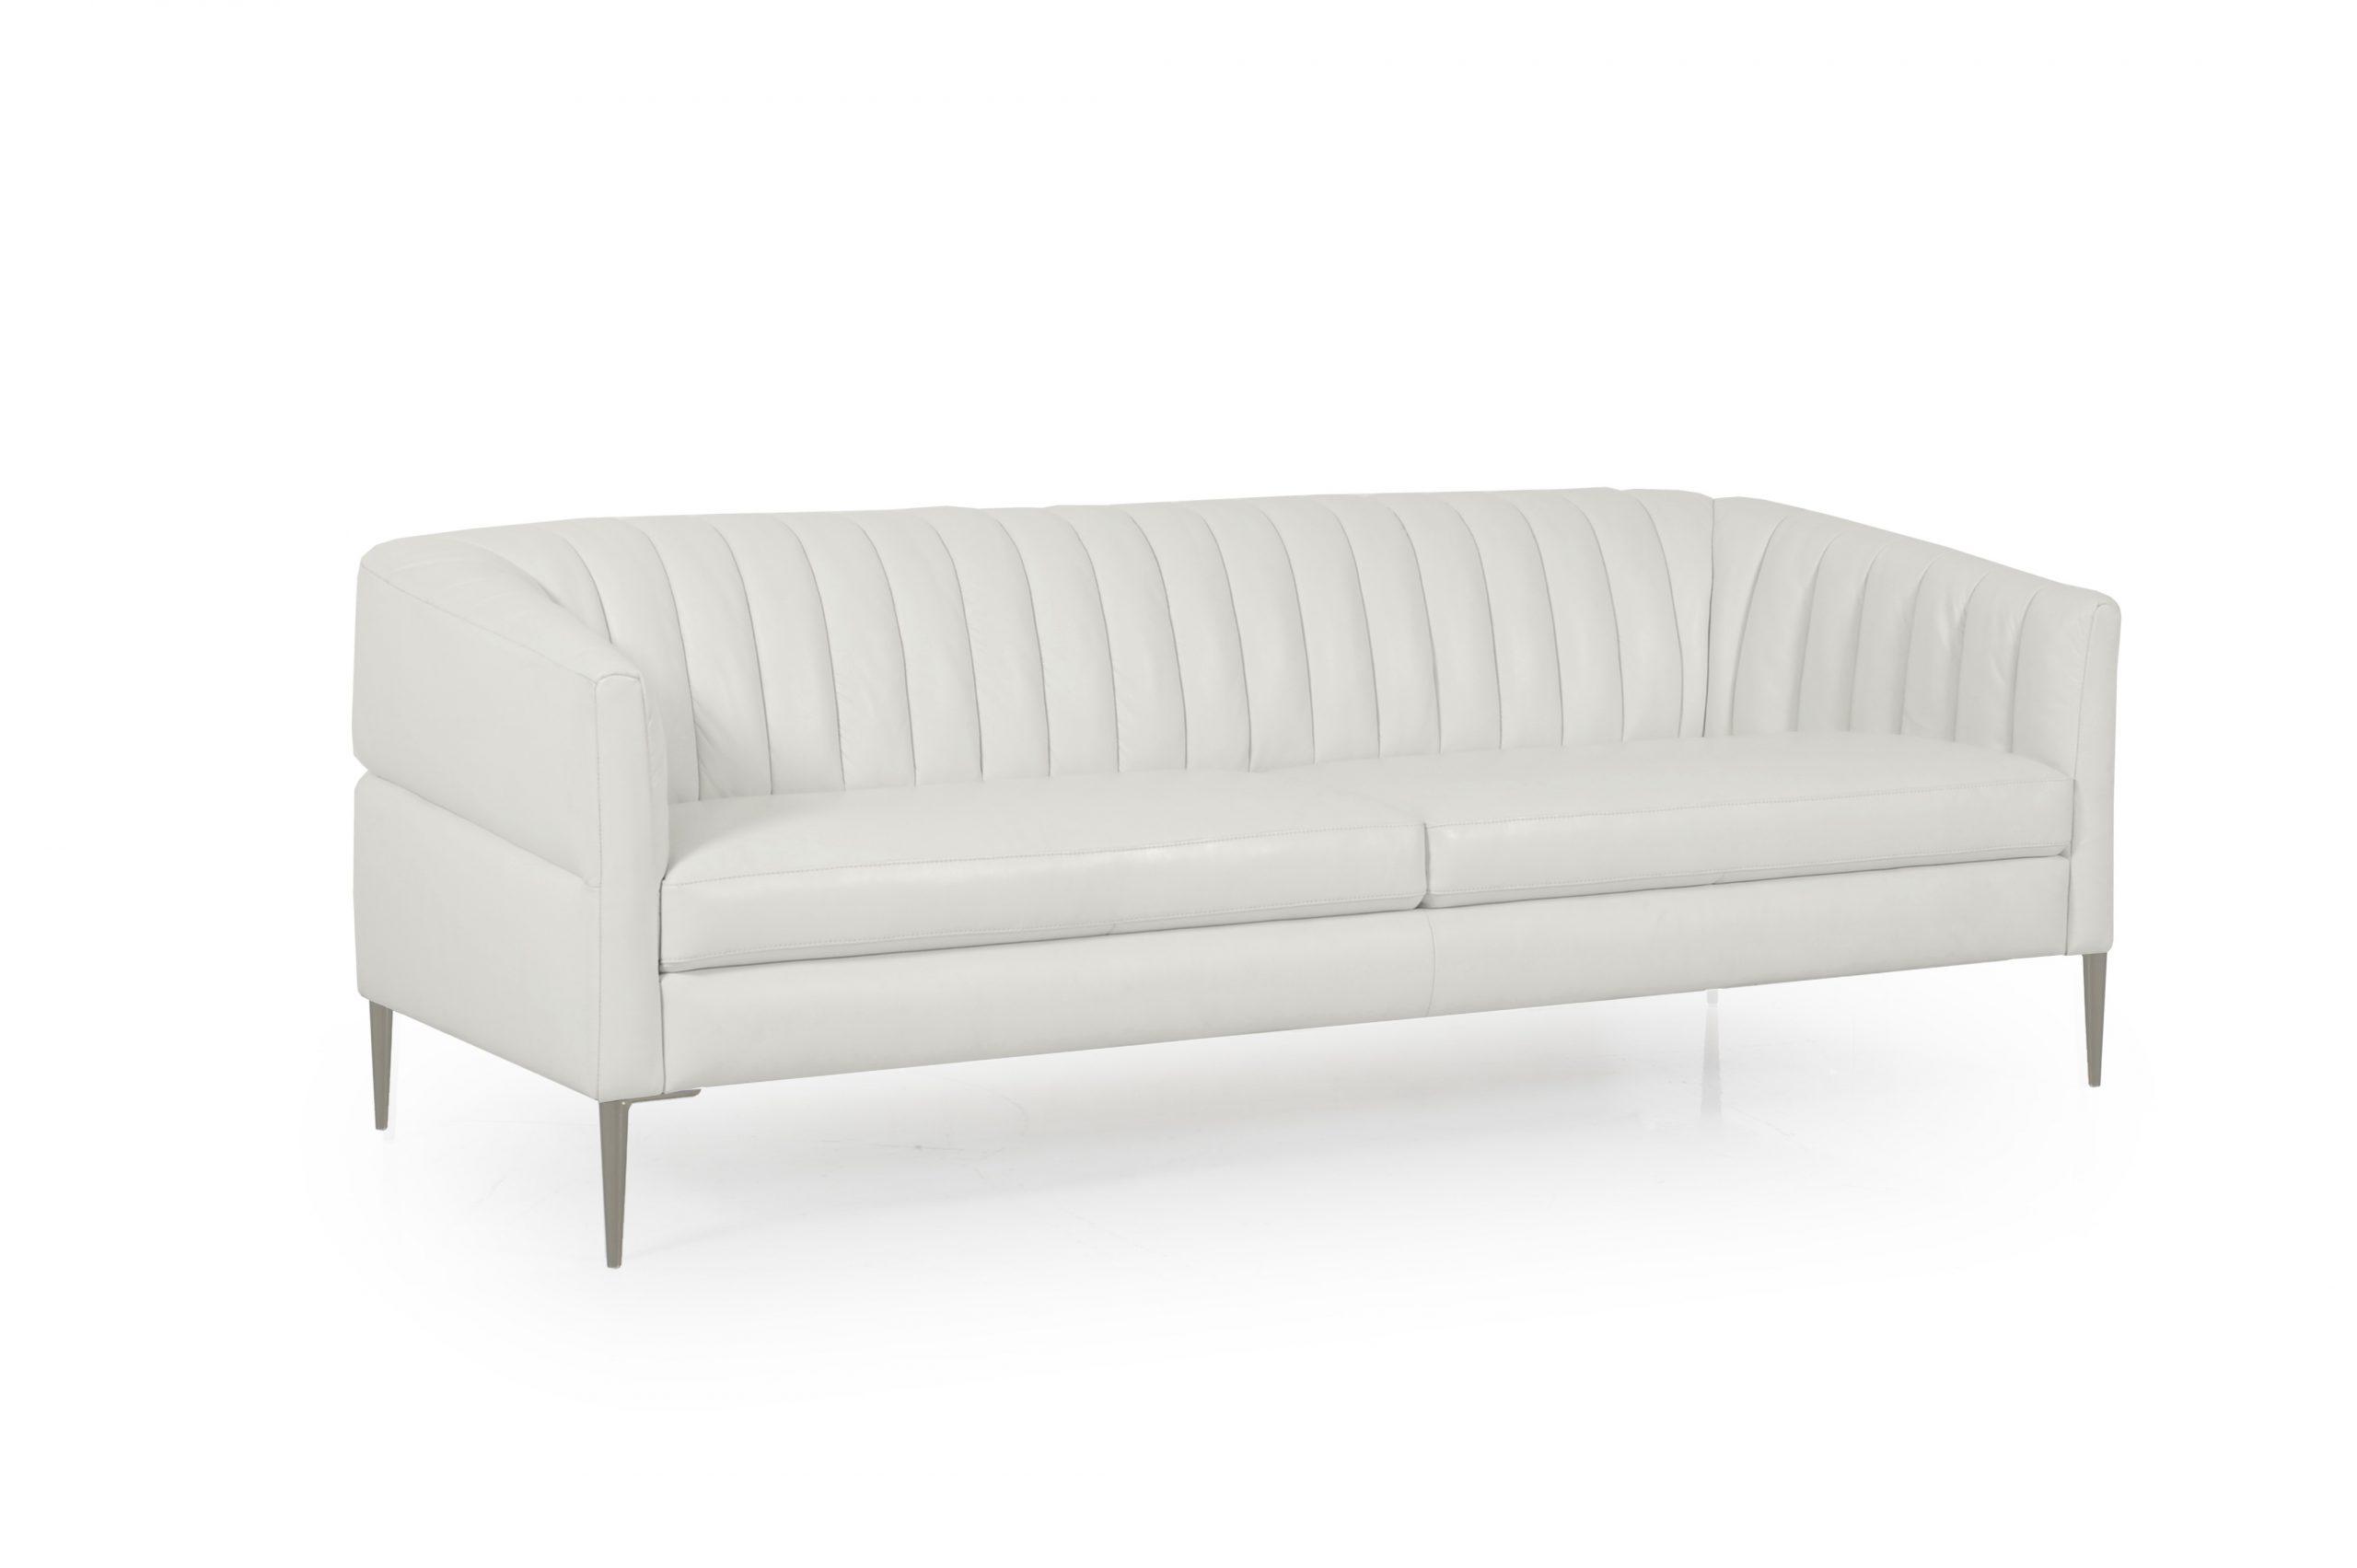 Contemporary, Modern Sofa 441 - Pearl 44103BS1296 in Pearl White Top grain leather